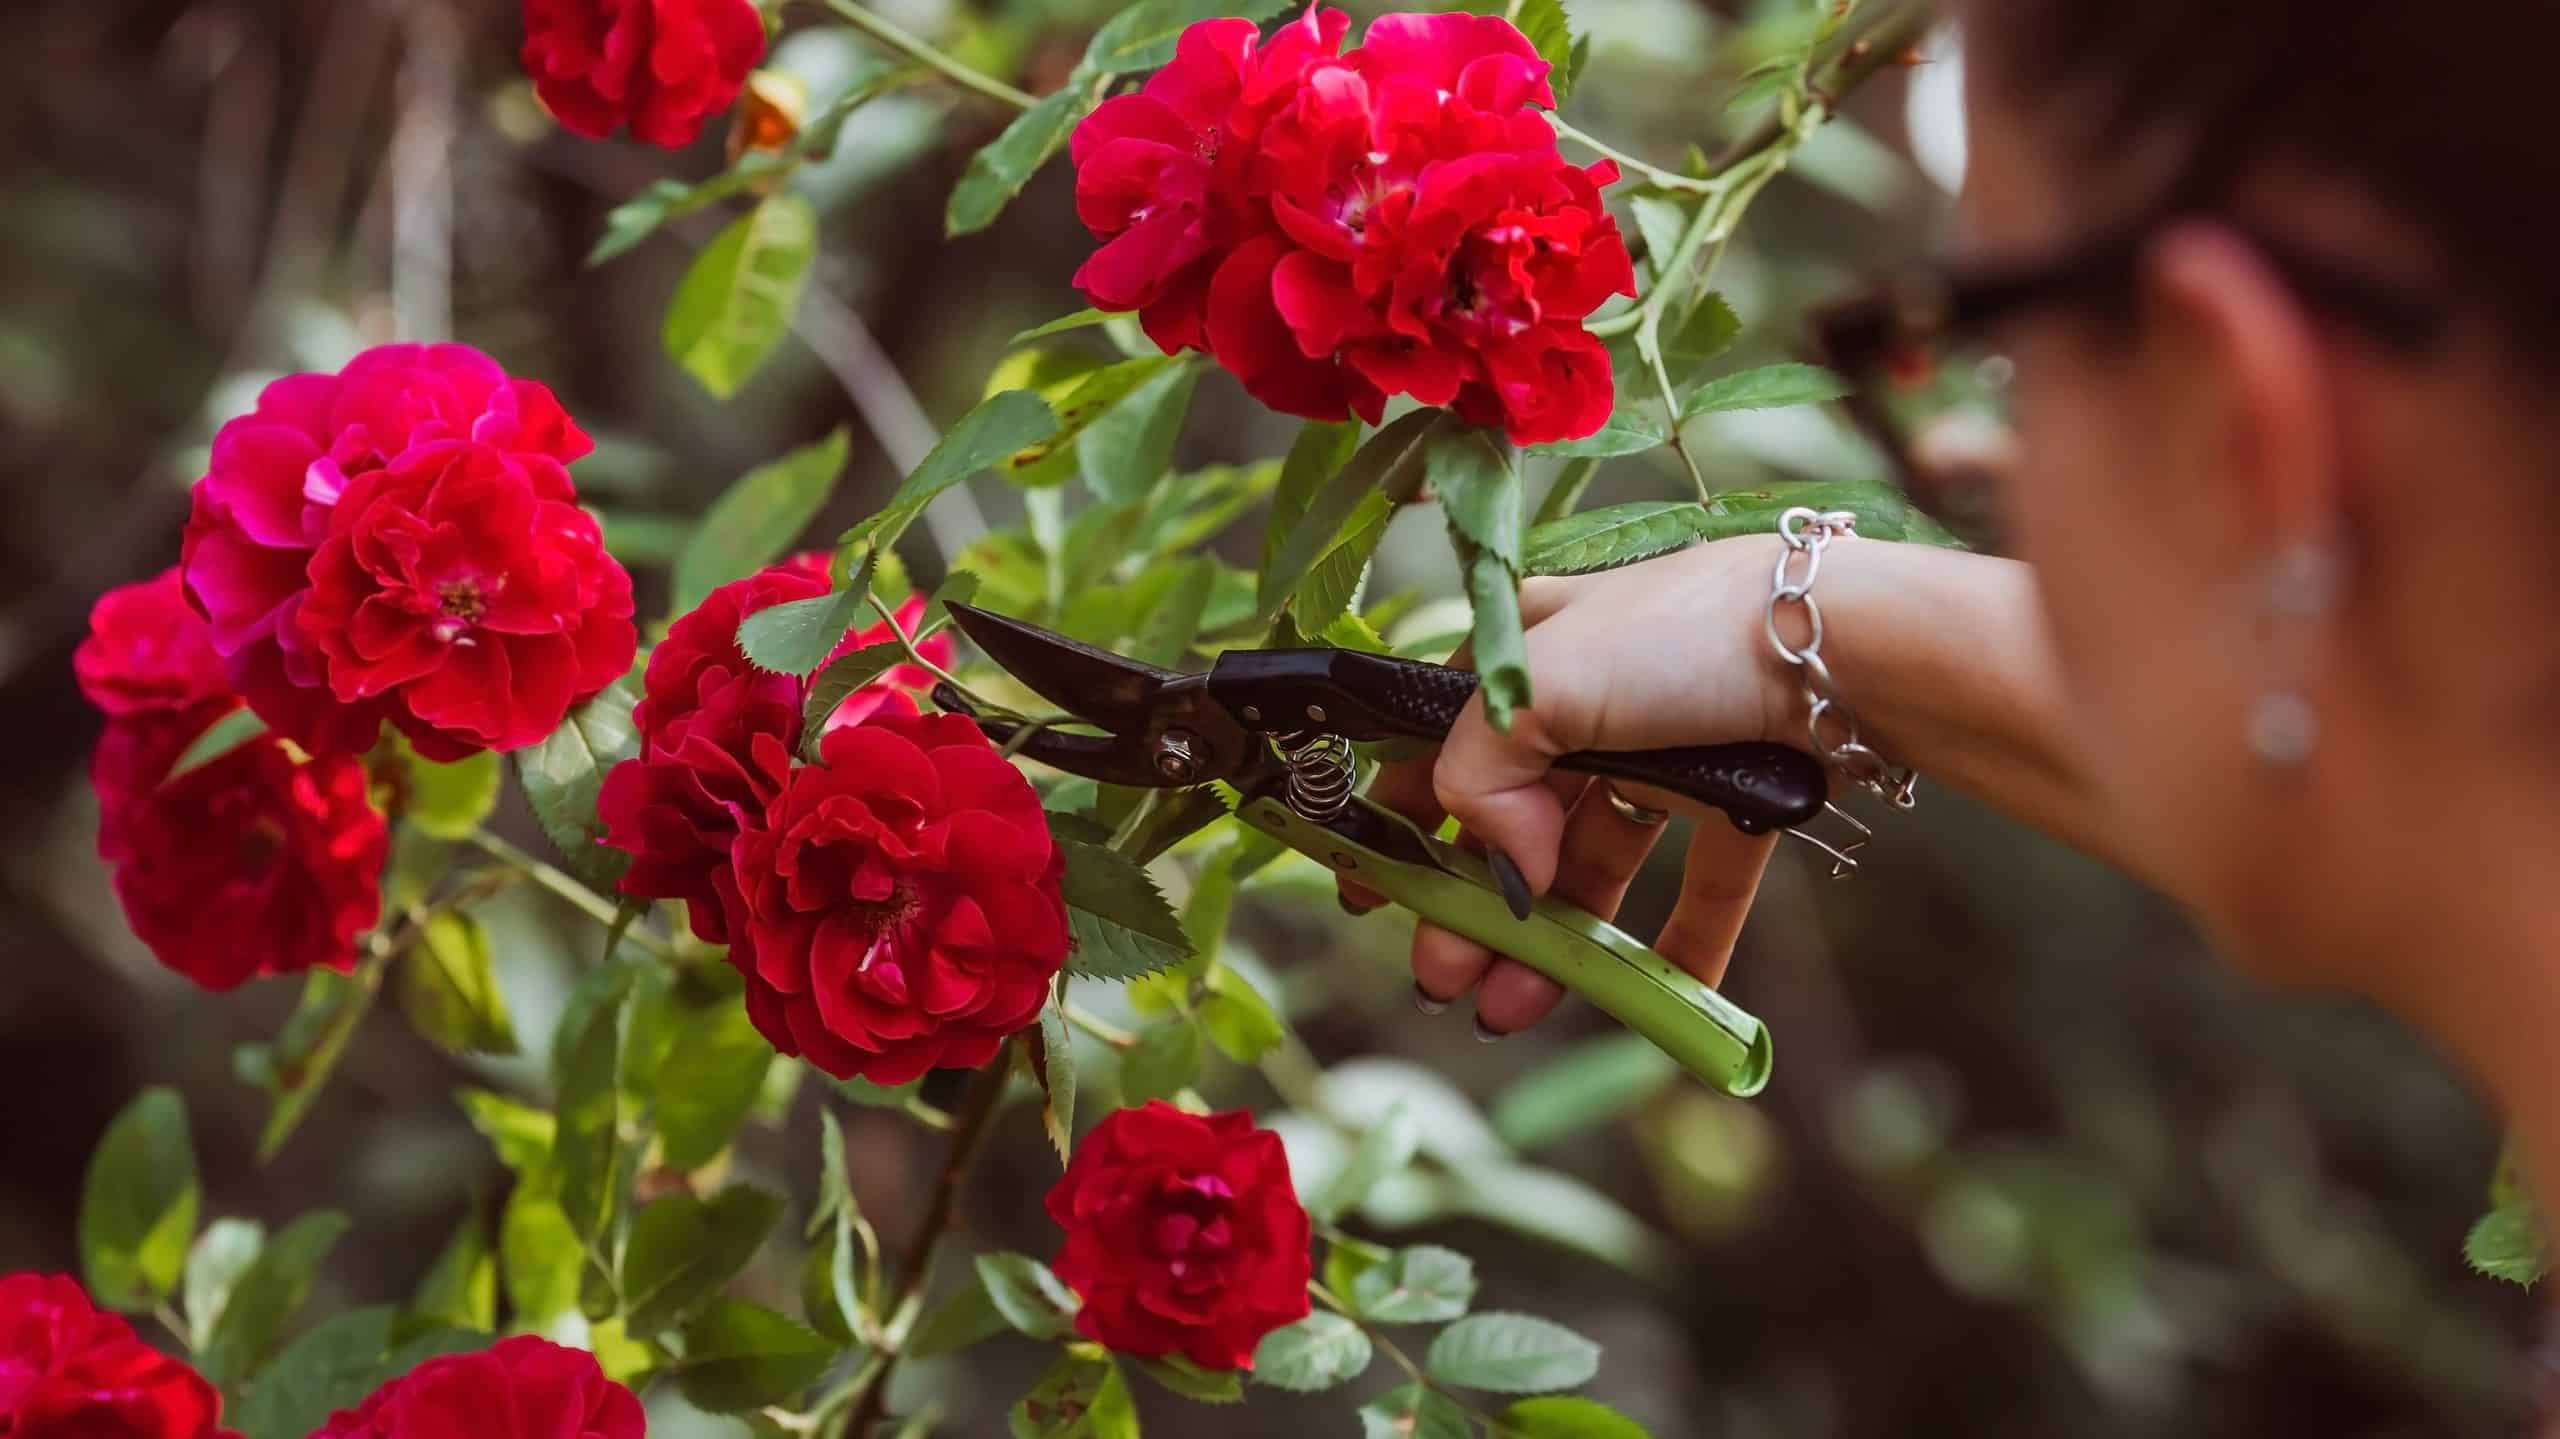 Red Hedge Rose. a beautiful red rose in the gardener's hand.